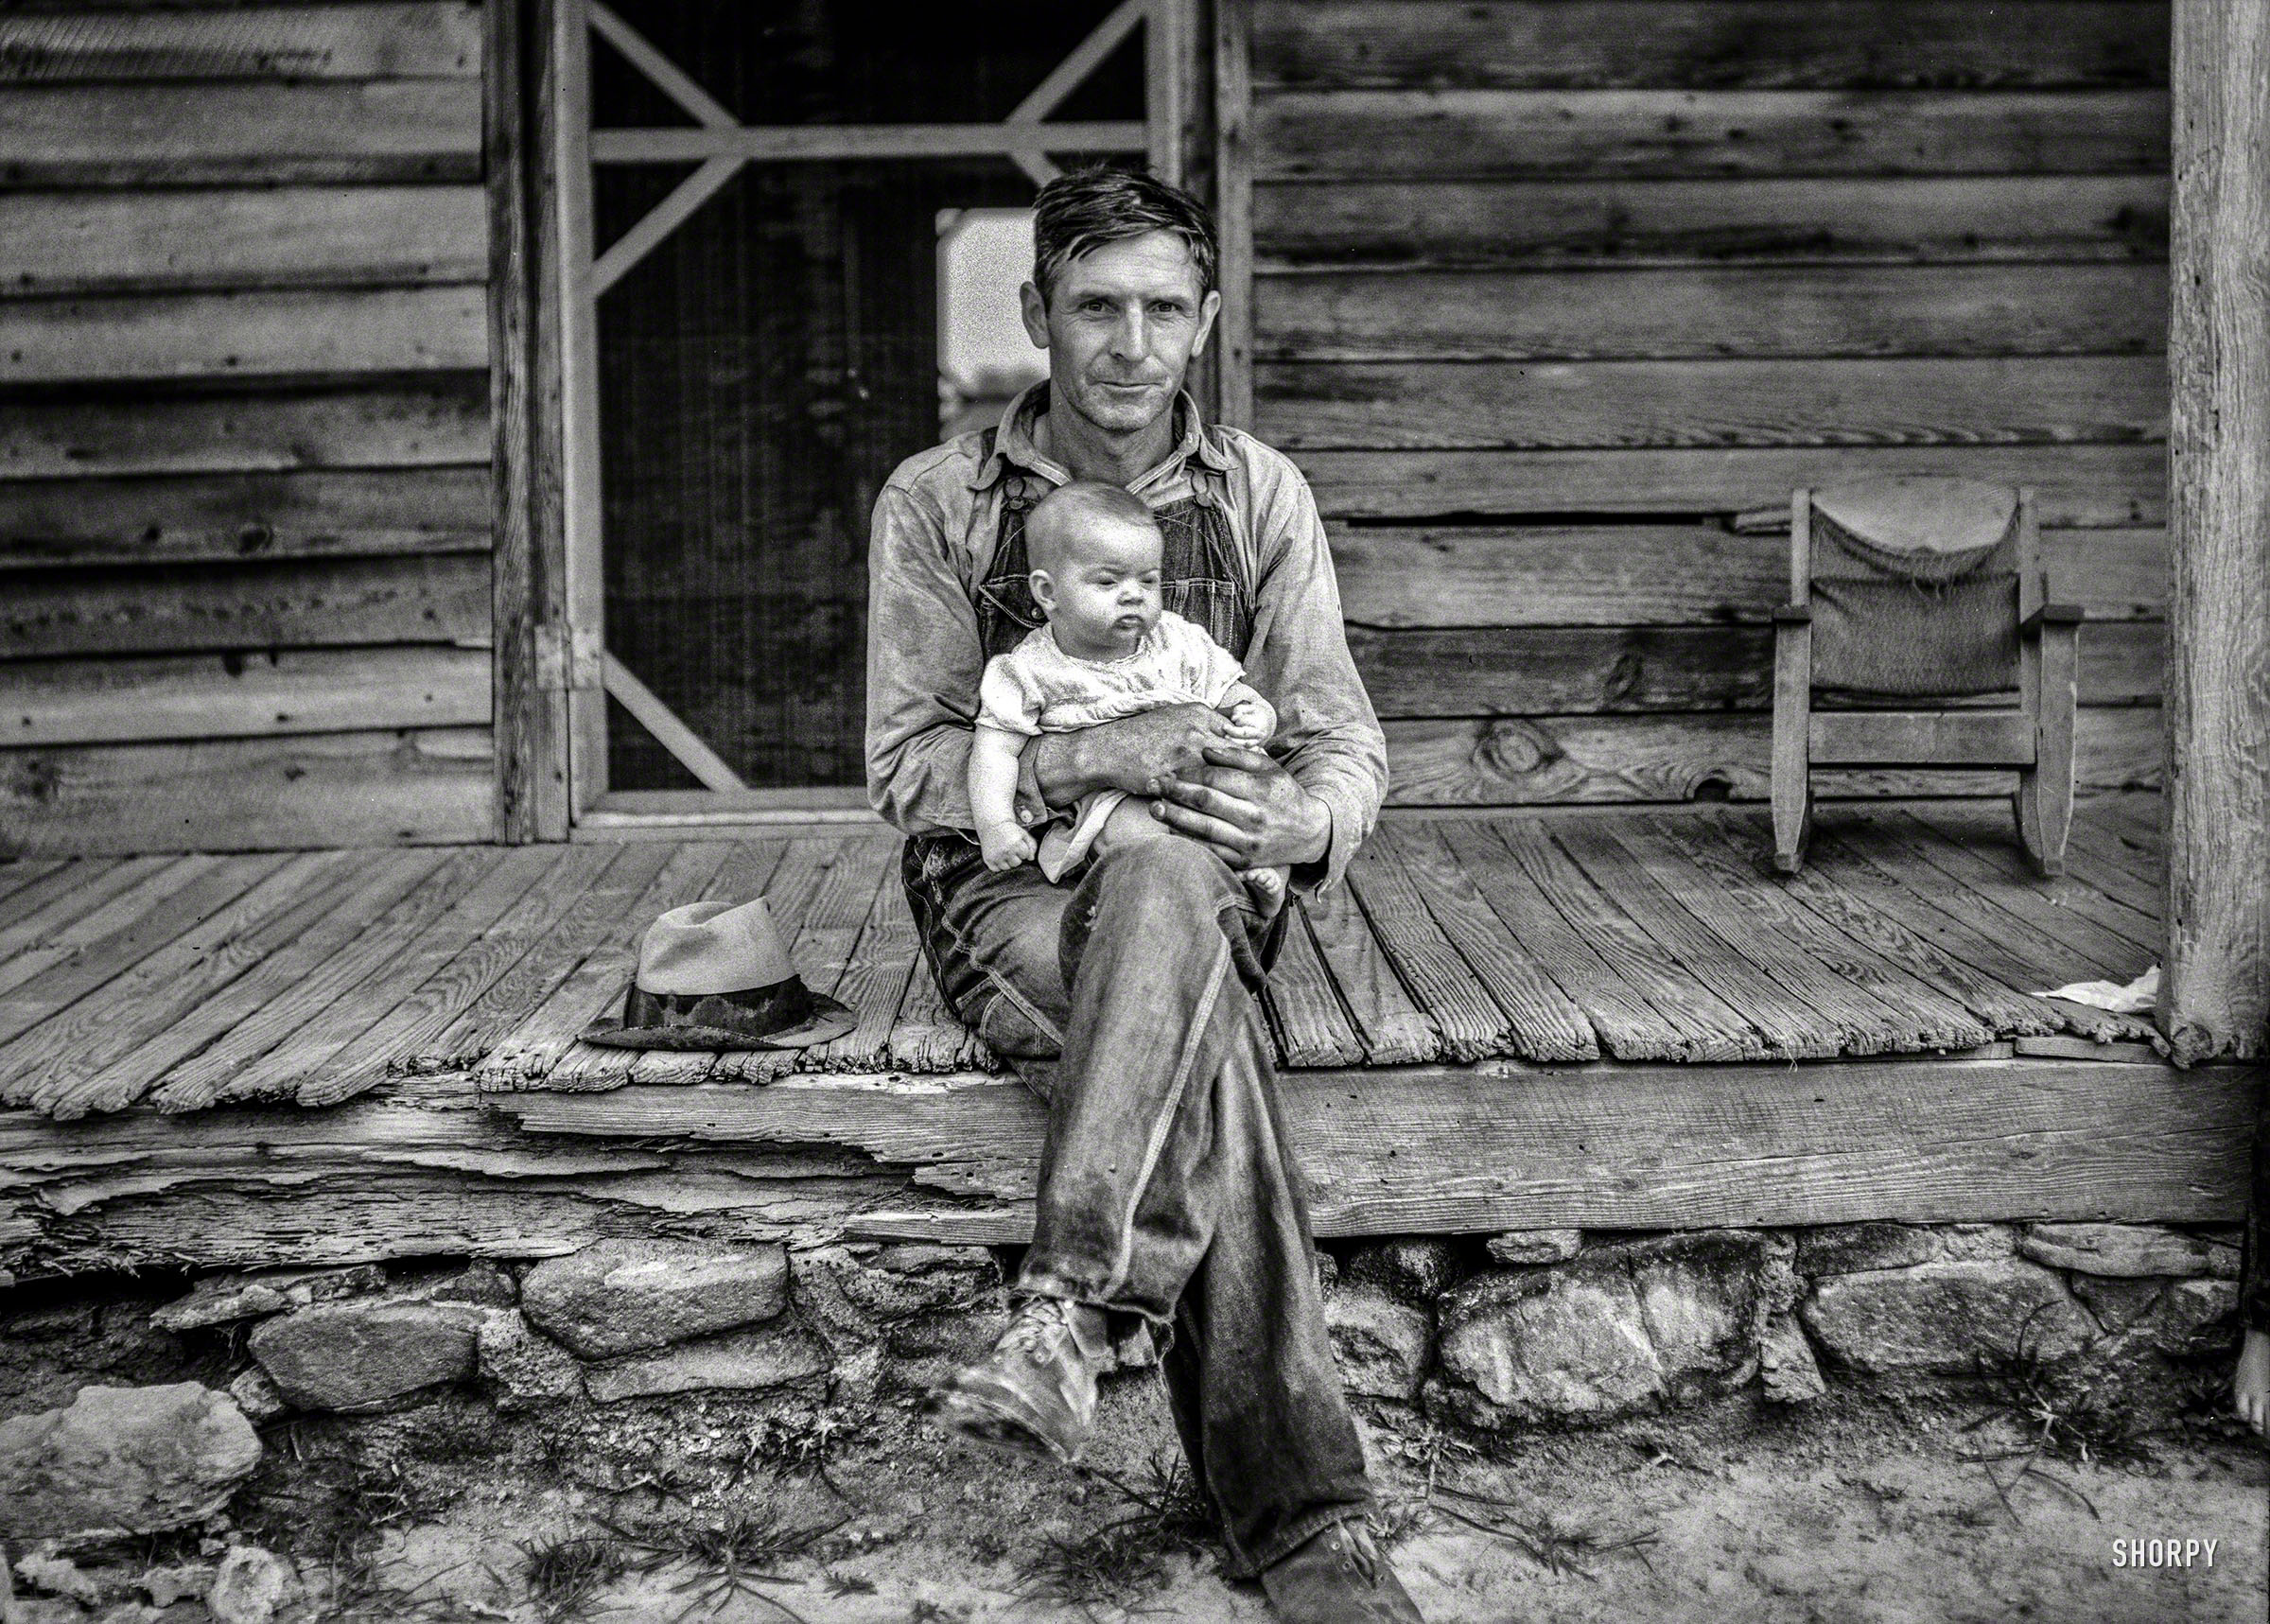 July 1939. "Mr. Whitfield, tobacco sharecropper, with baby on front porch. North Carolina, Person County, near Gordonton." Happy Father's Day from Shorpy! Photo by Dorothea Lange for the Resettlement Administration. View full size.